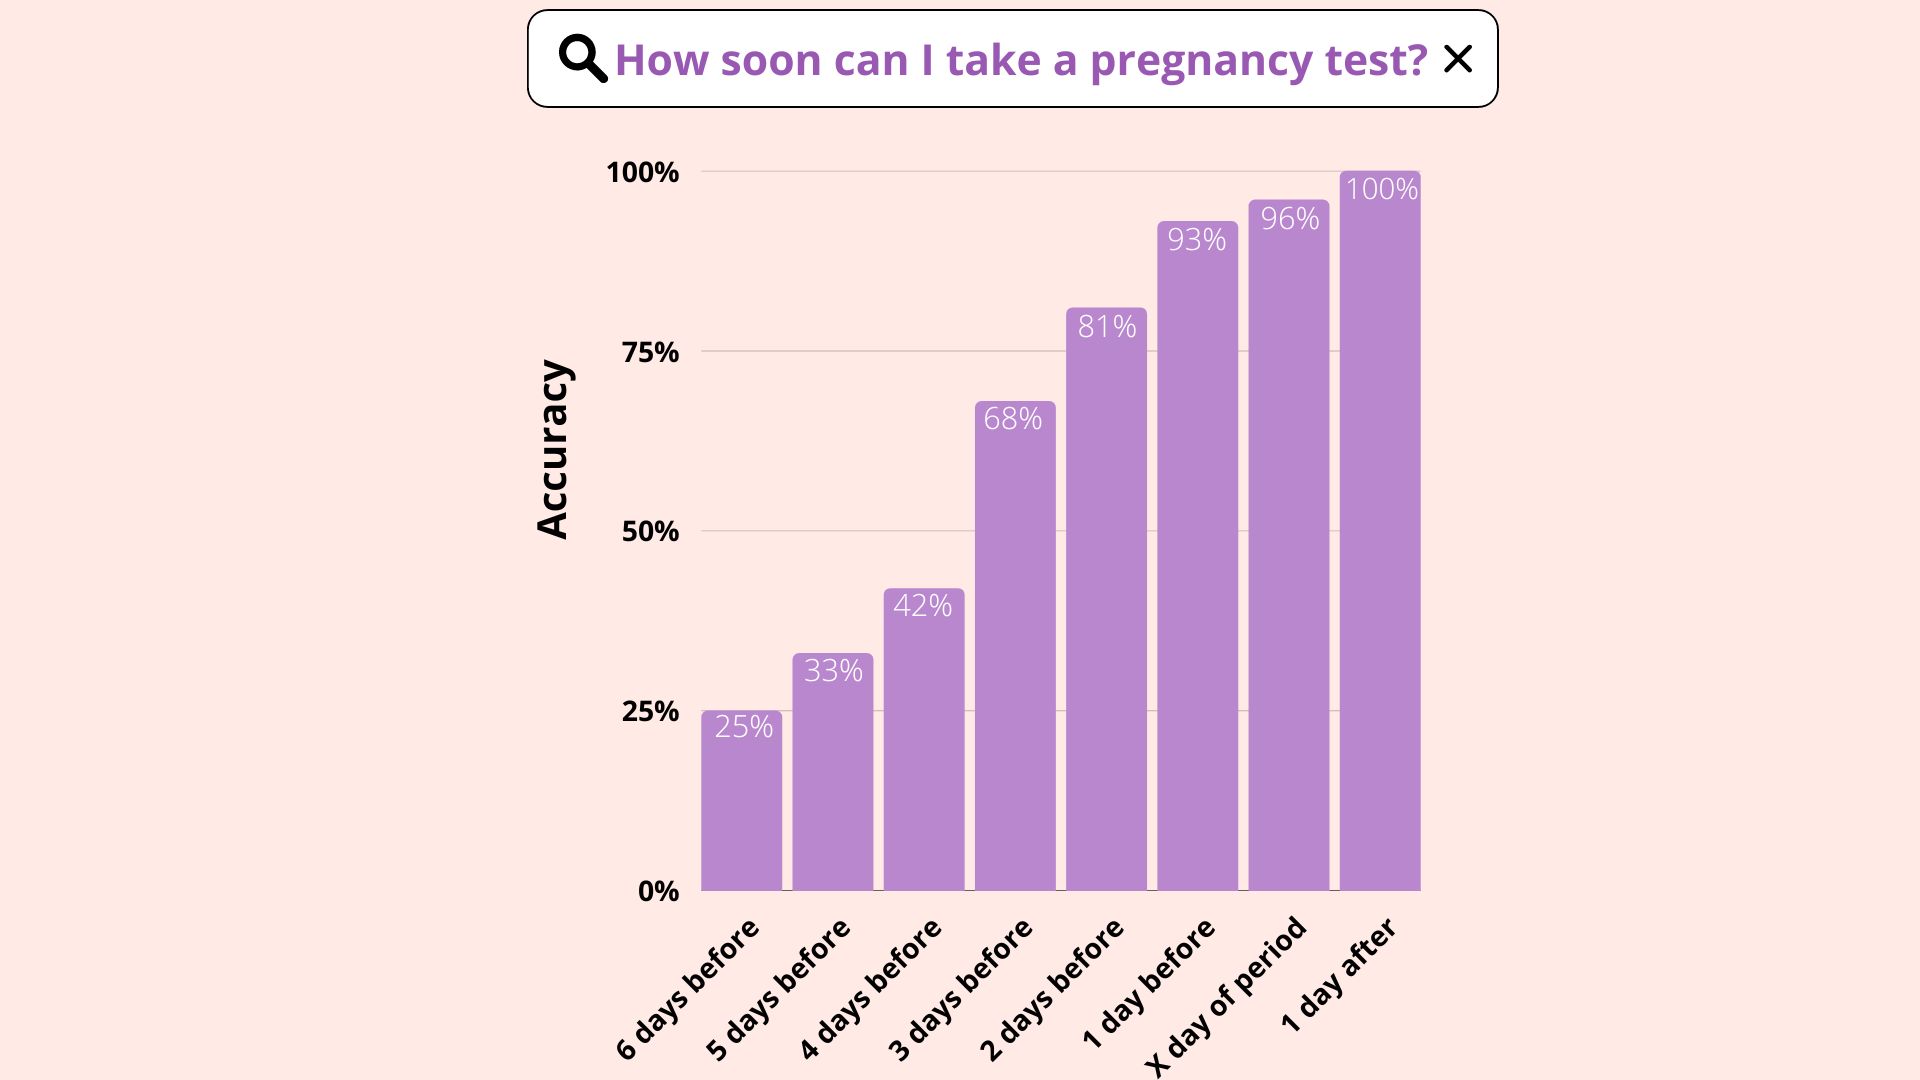 Image of a graph illustrating how early to take a pregnancy test